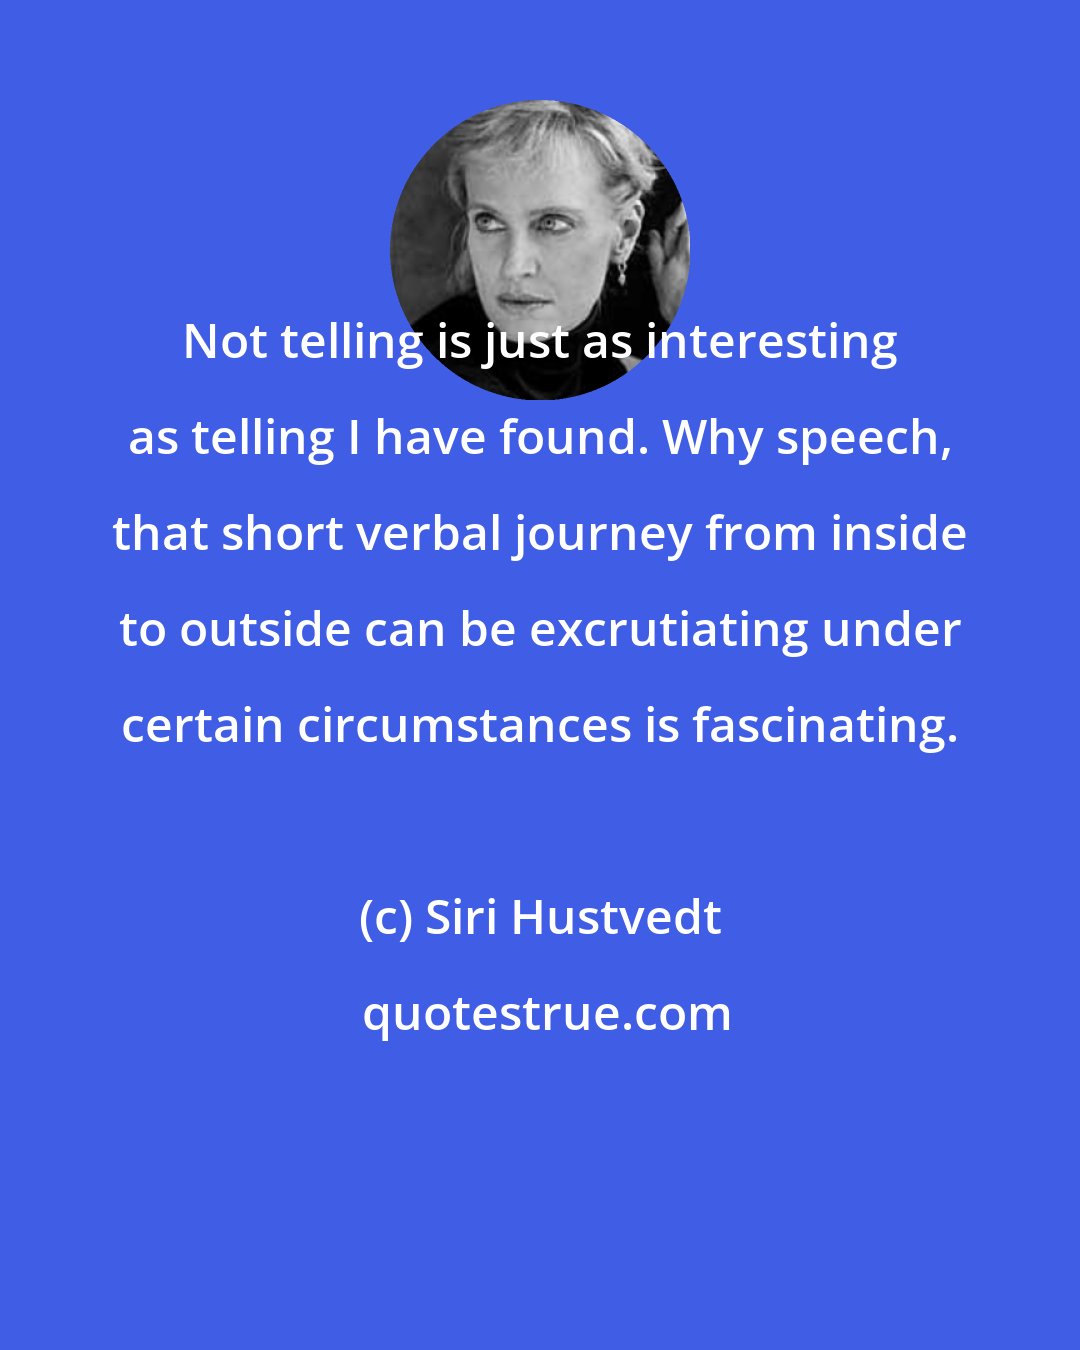 Siri Hustvedt: Not telling is just as interesting as telling I have found. Why speech, that short verbal journey from inside to outside can be excrutiating under certain circumstances is fascinating.